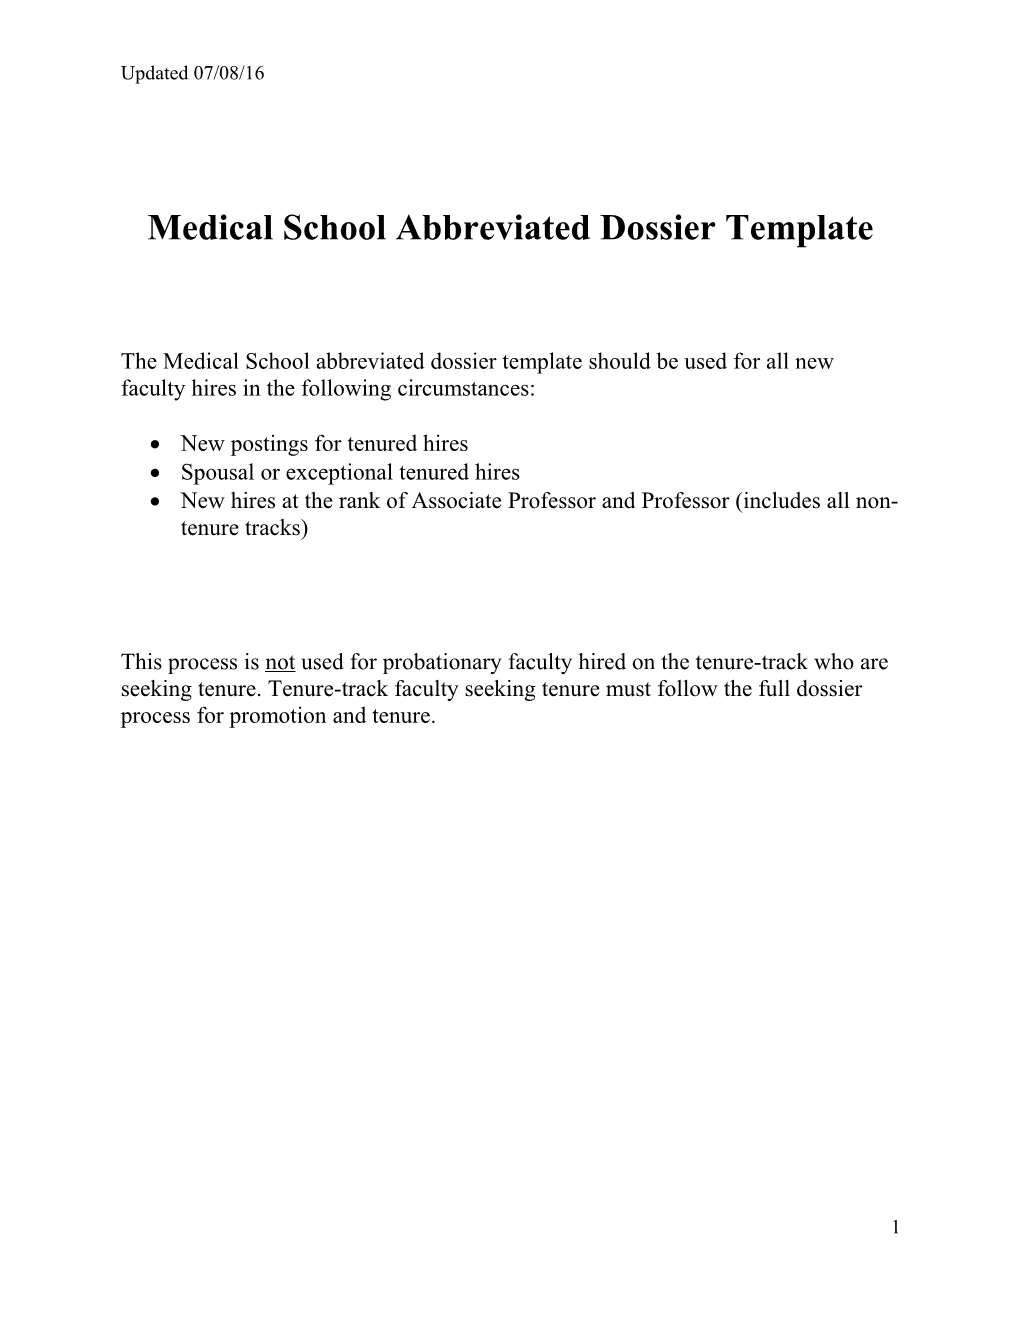 Abbreviated Dossier for Tenured Hires